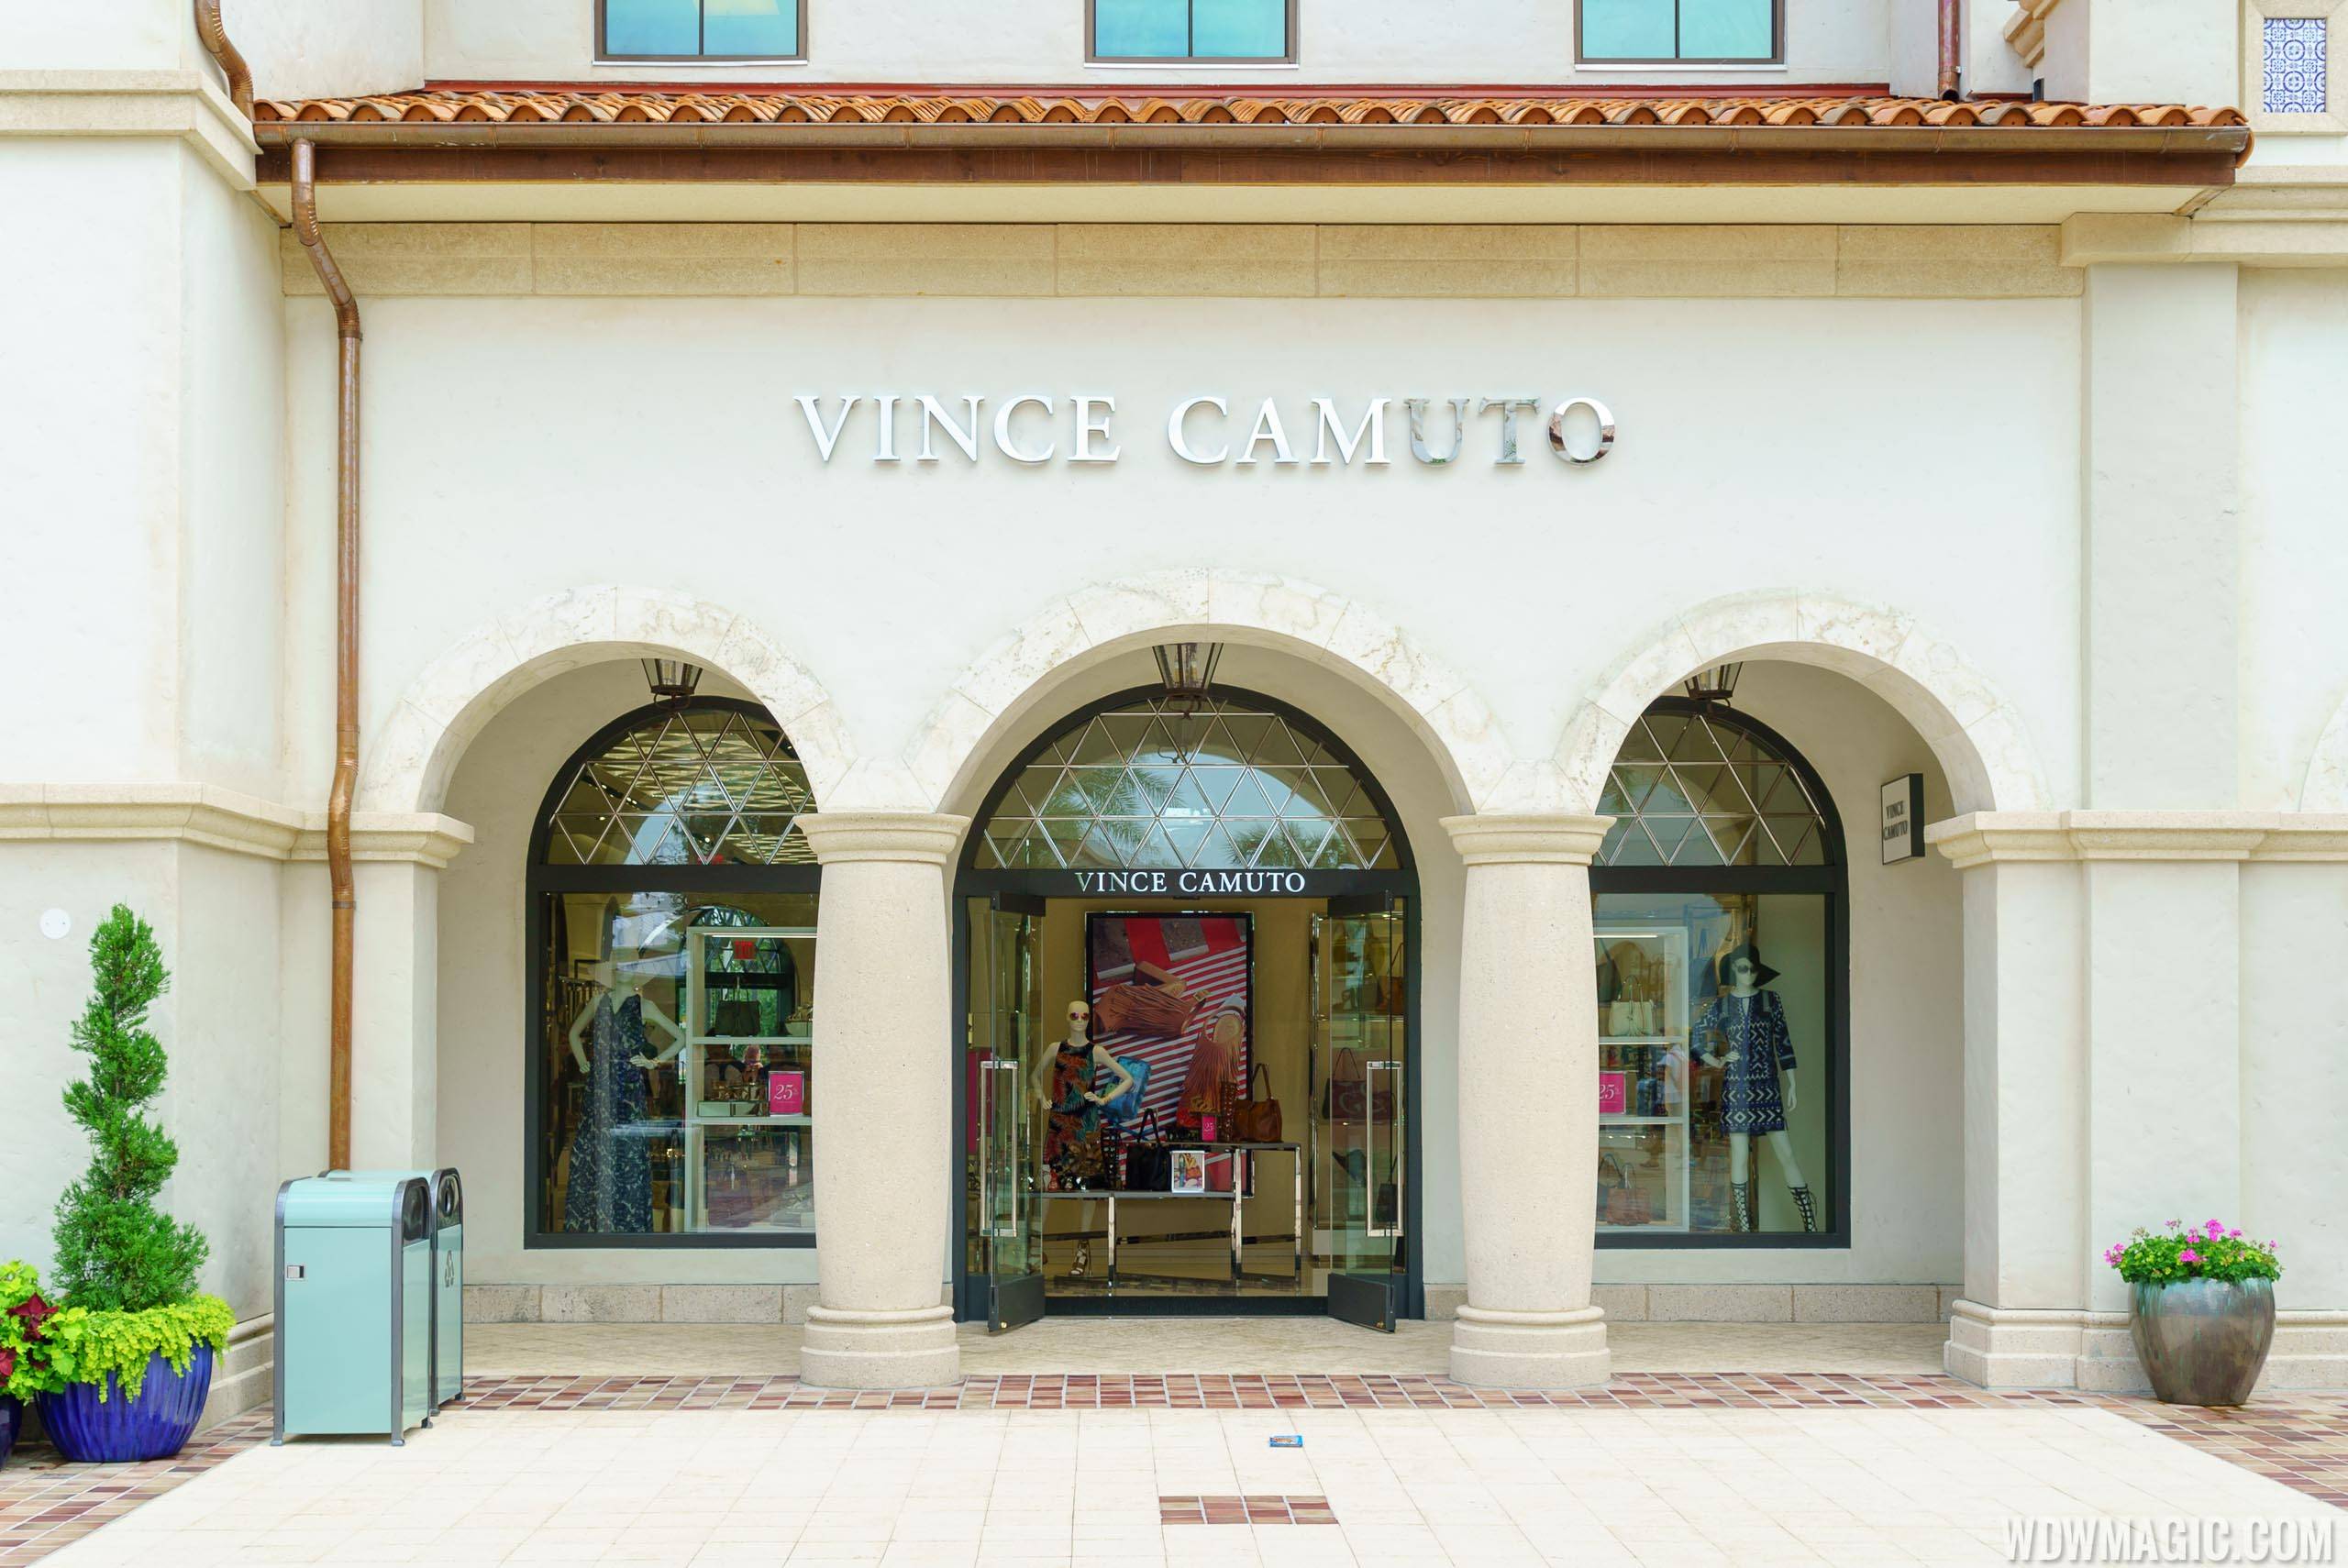 PHOTOS - Vince Camuto opens first store in Central Florida at Disney Springs